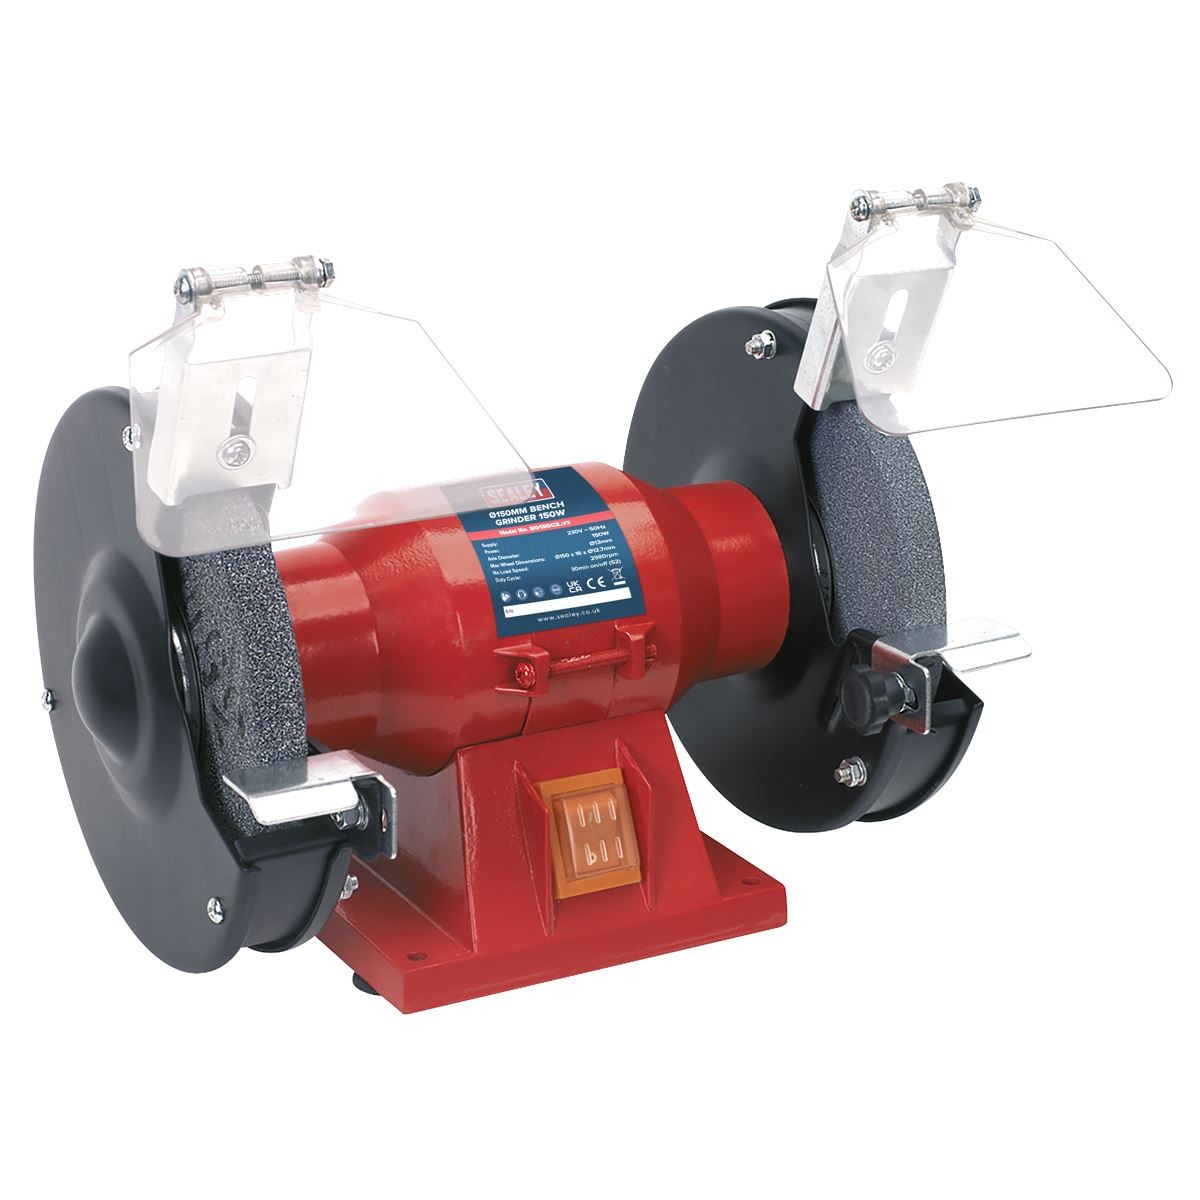 Sealey Bench Grinder & Vice Stand Deal